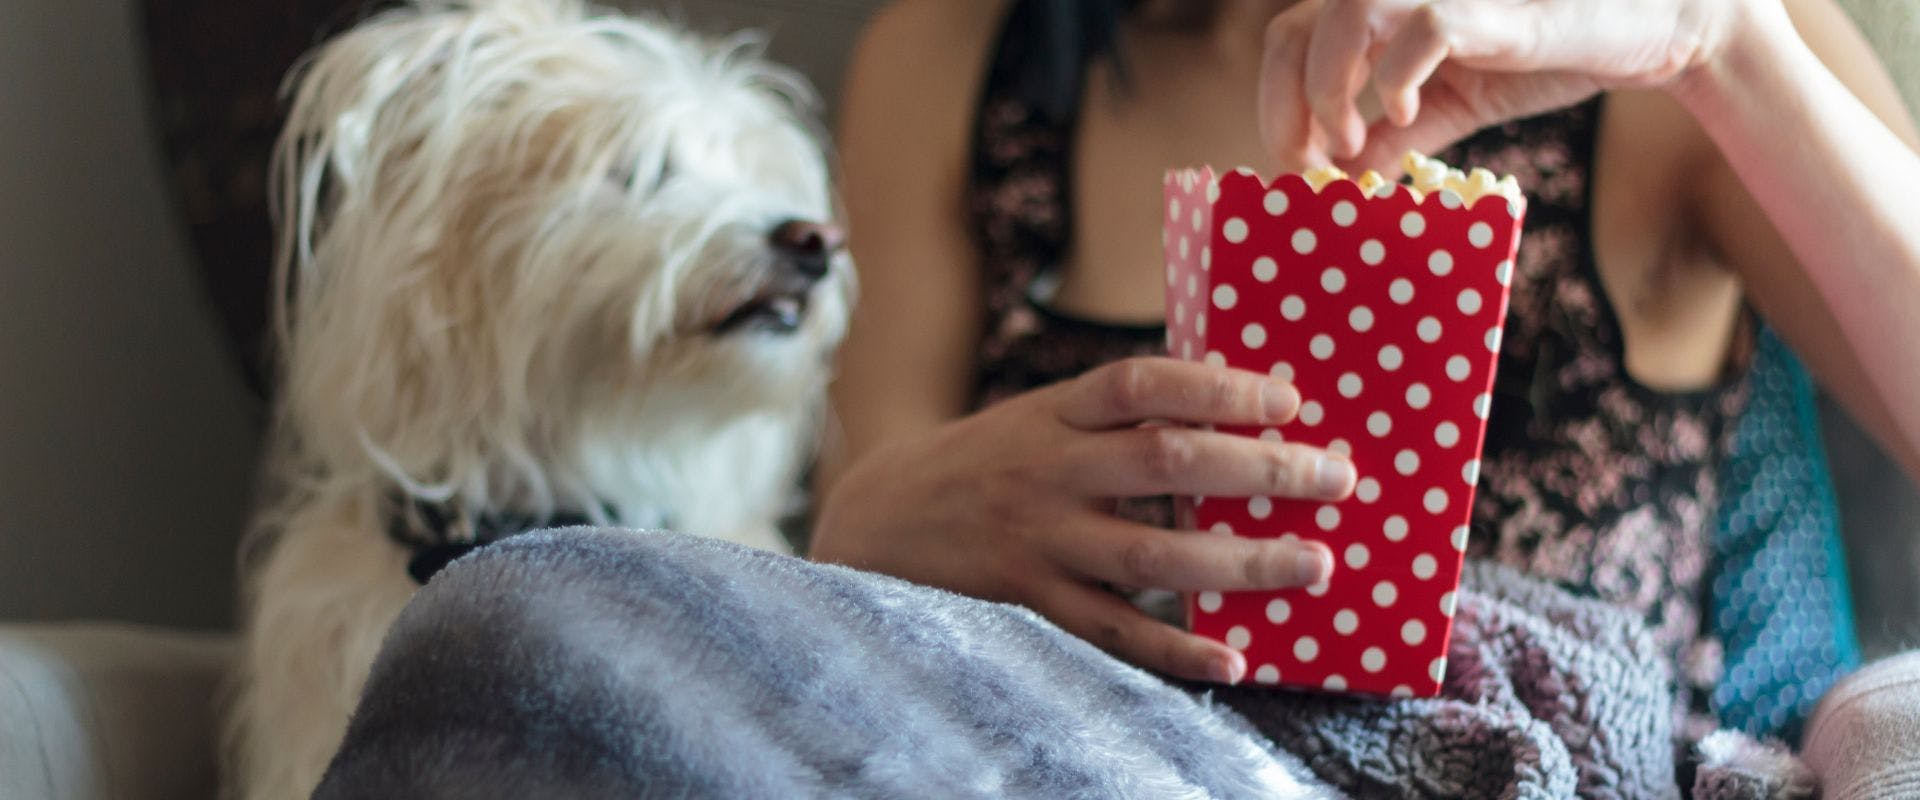 Person eating popcorn with small white dog